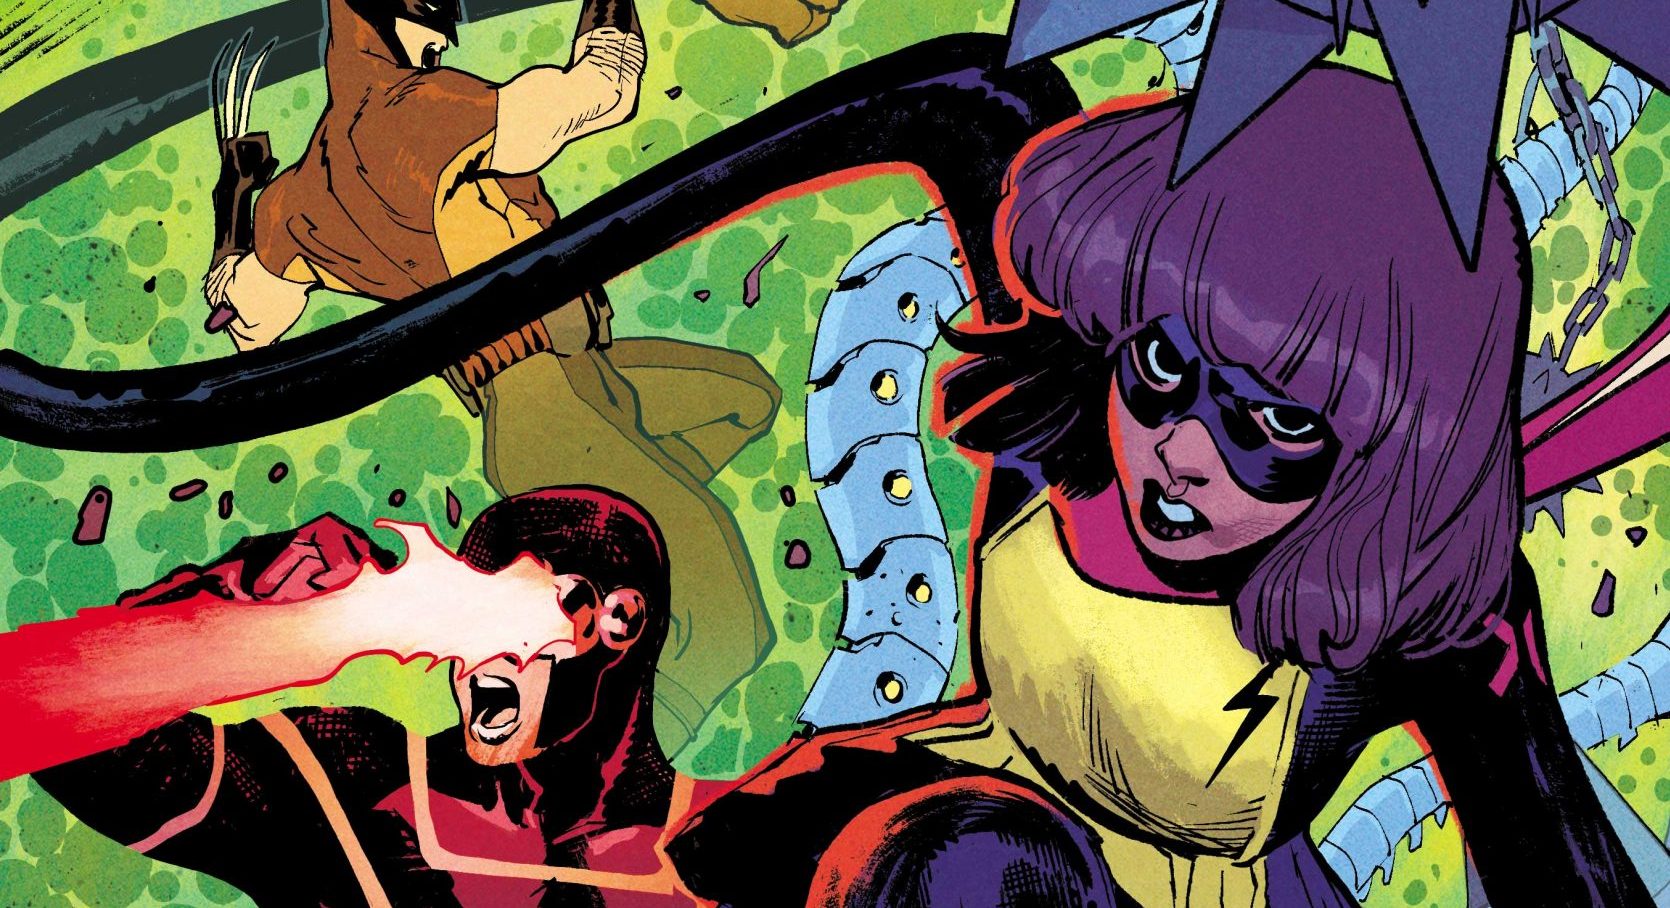 New 'Ms. Marvel: The New Mutant' details and trailer released